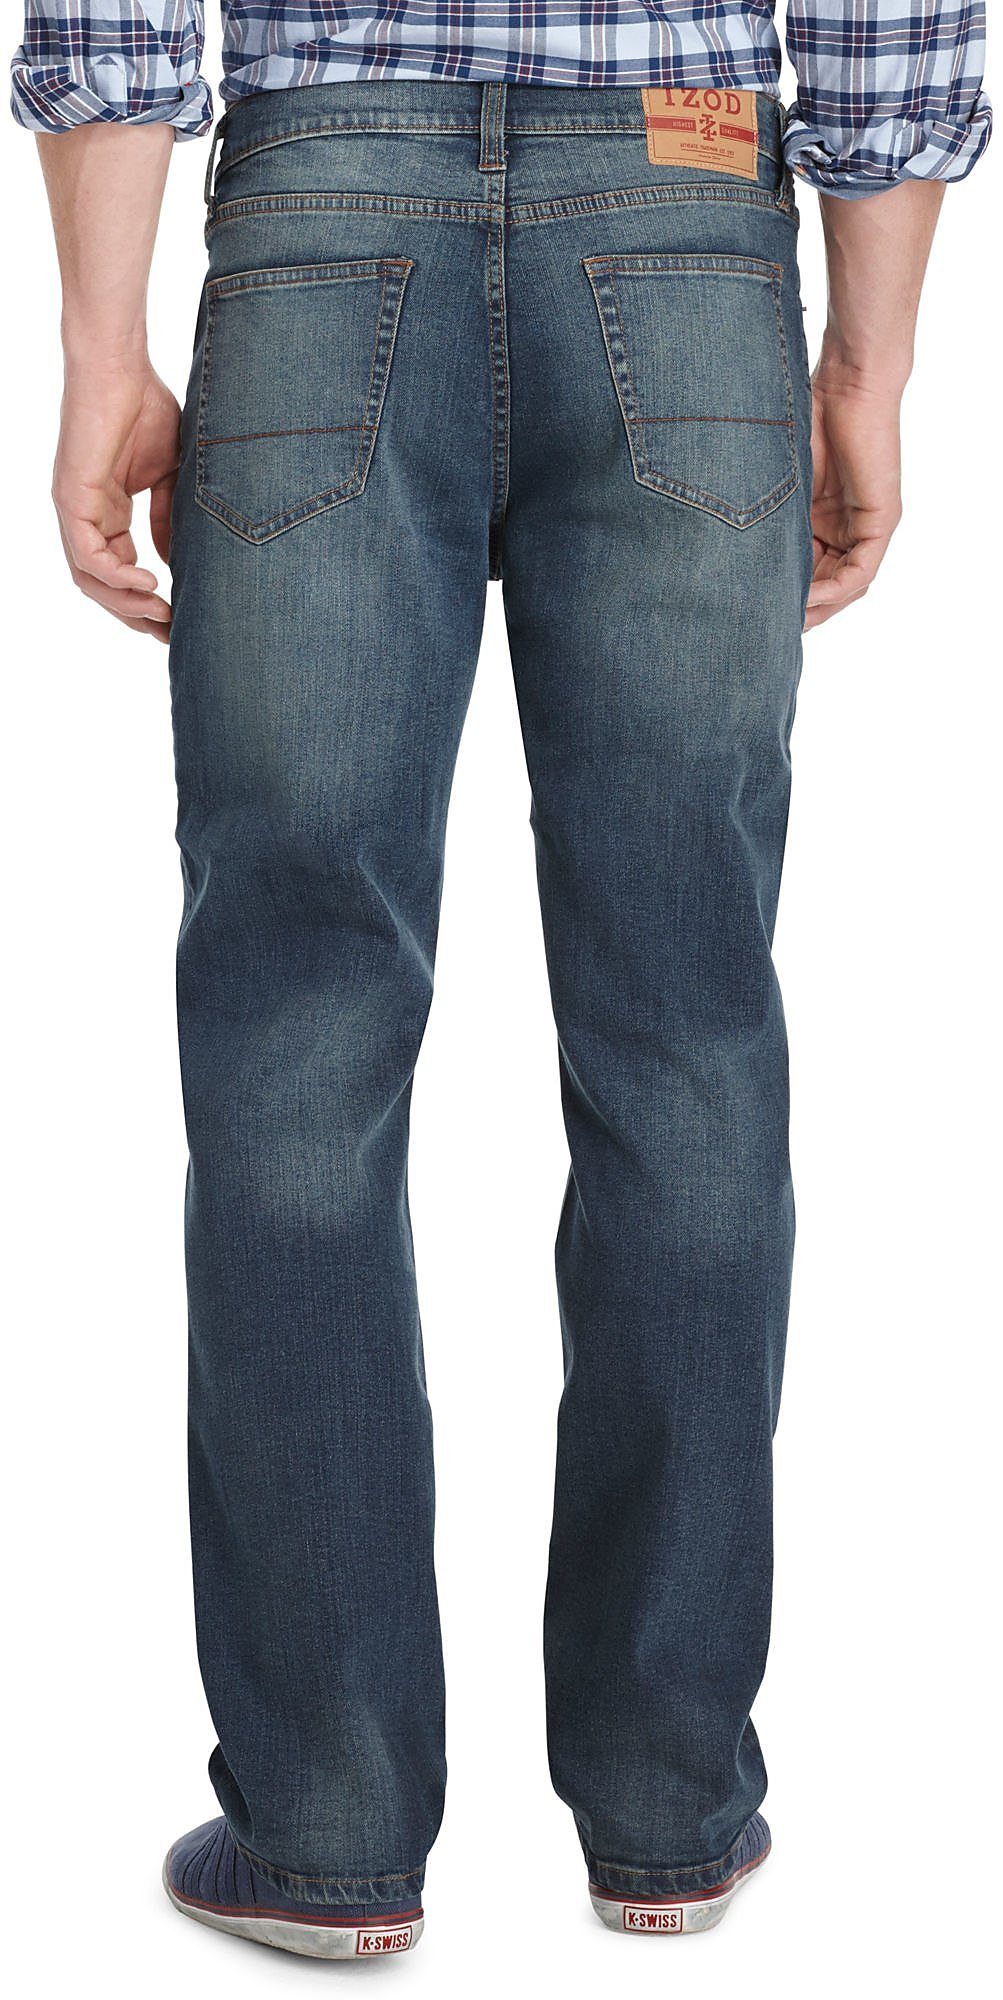 Izod IZOD Mens Comfort Stretch Relaxed Fit Jeans